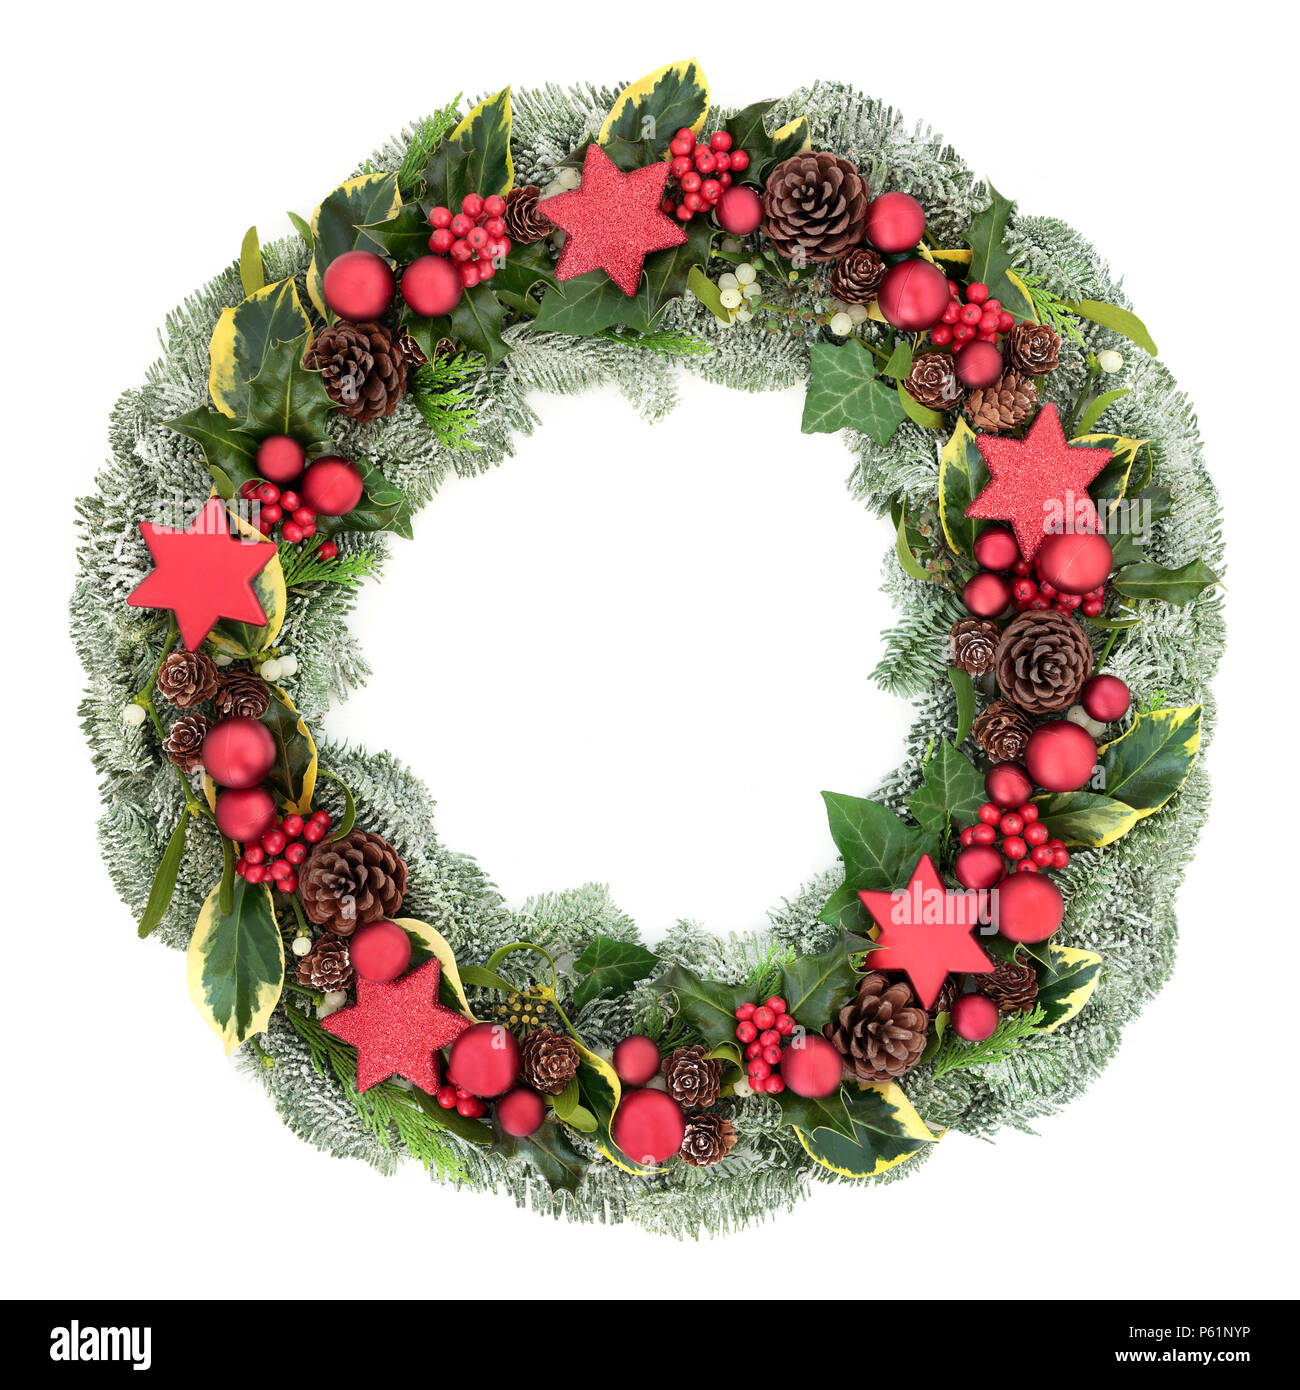 Christmas wreath with red bauble decorations, winter flora of holly, mistletoe, ivy, snow covered spruce fir and pine cones isolated on white backgrou Stock Photo